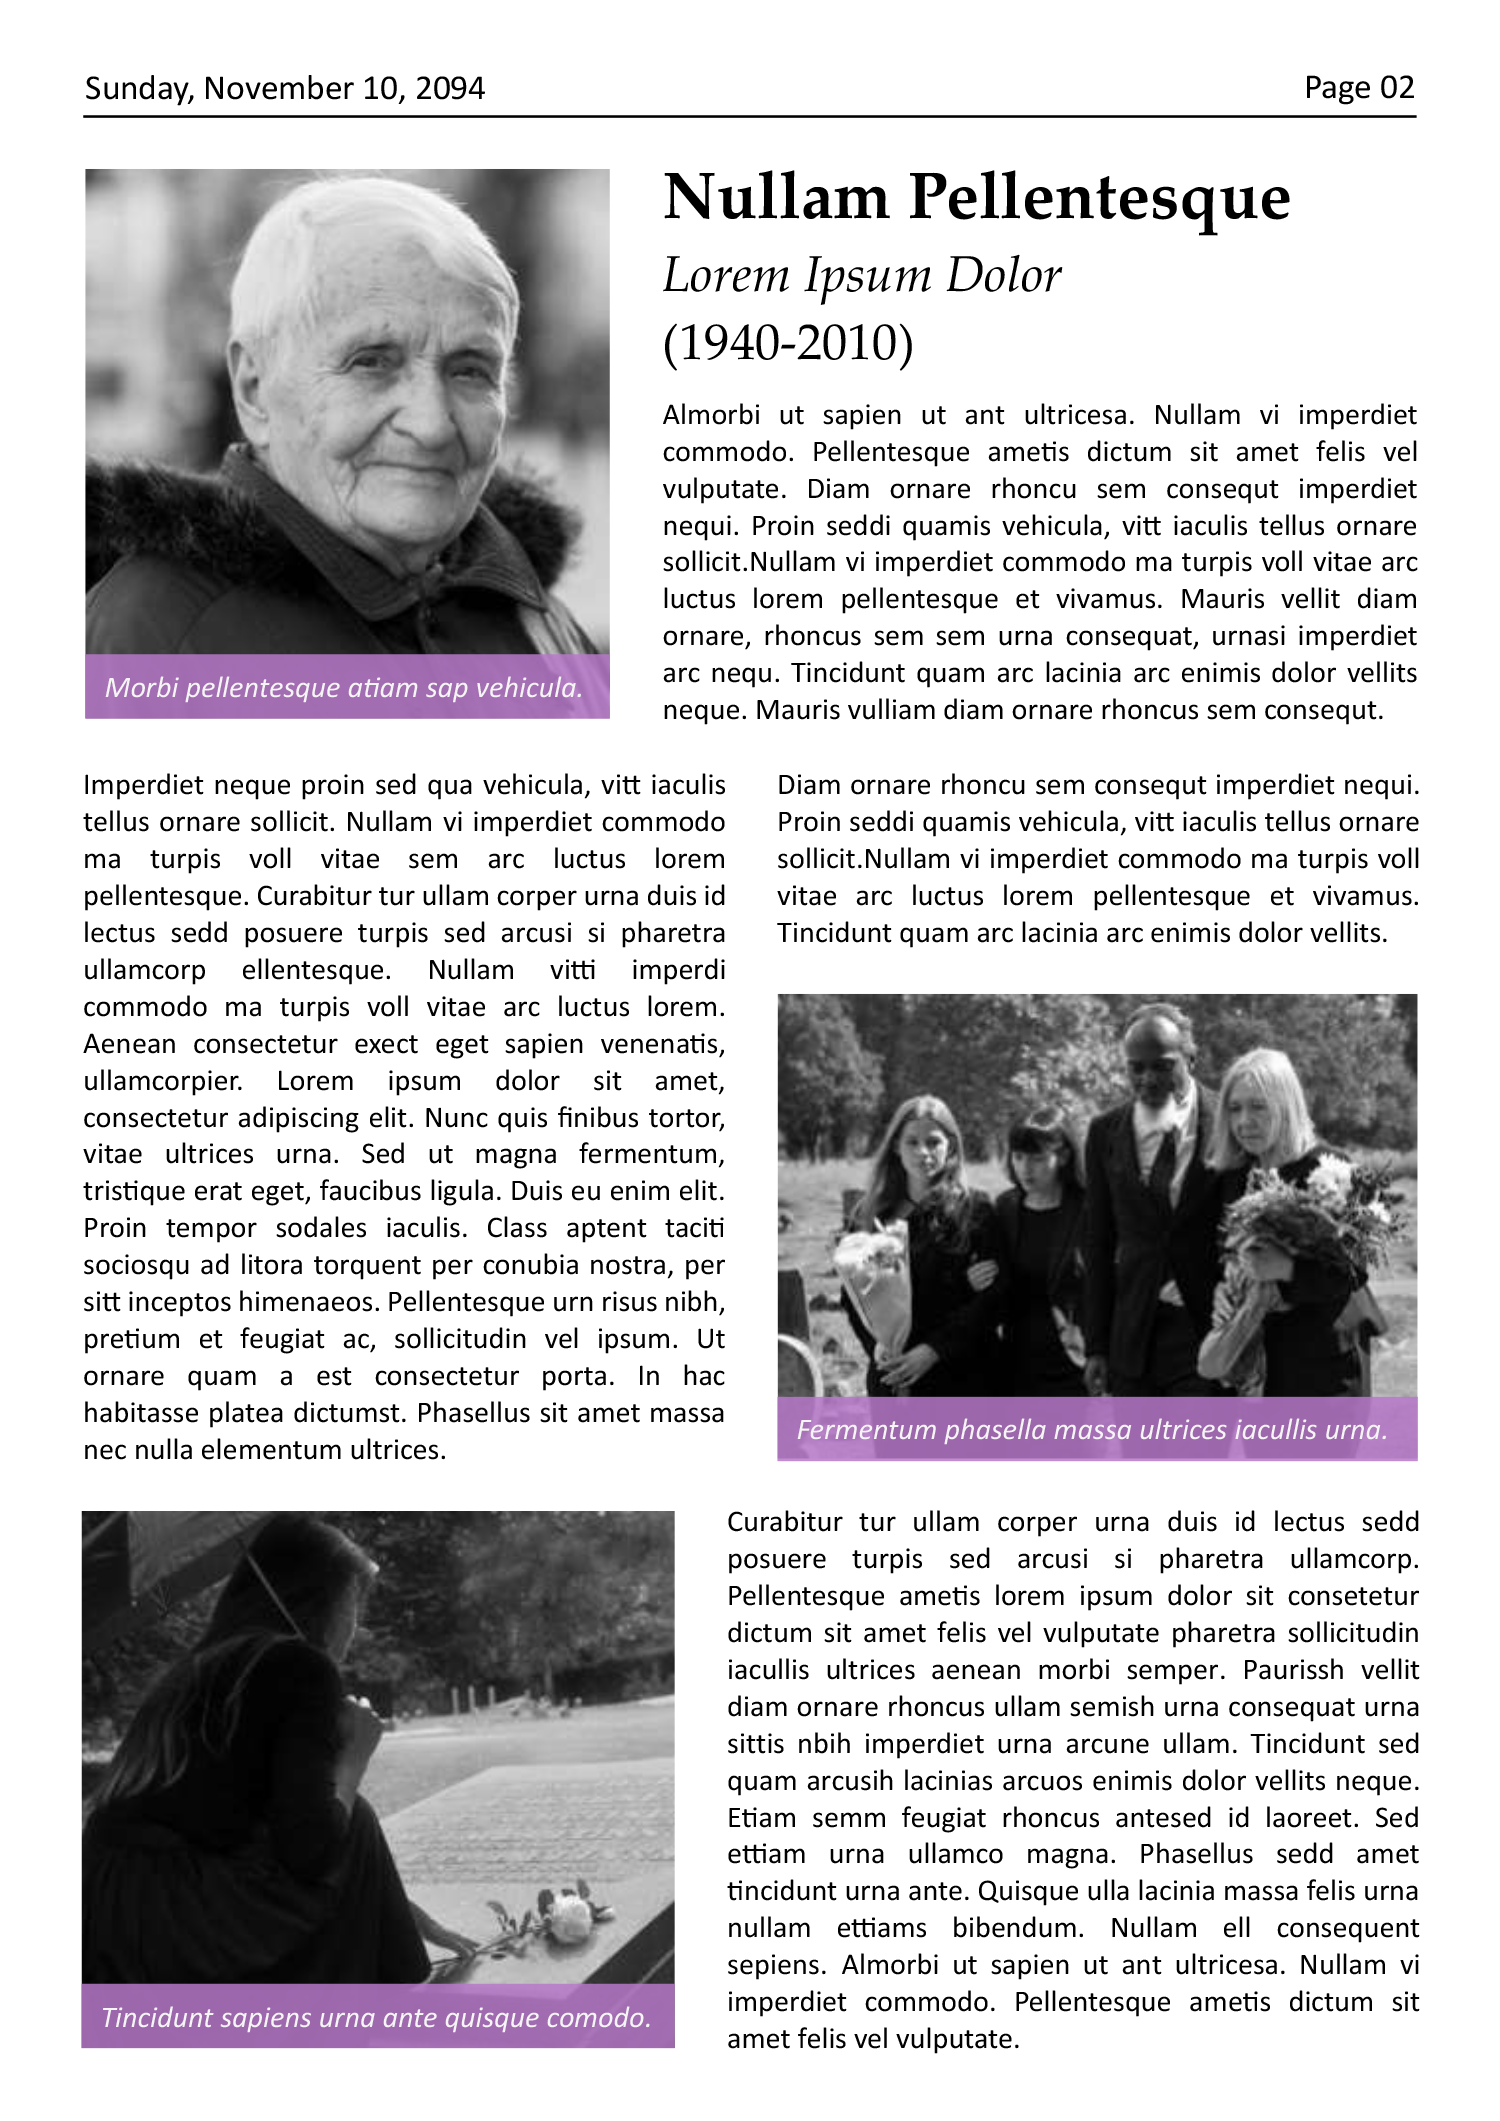 Classic A4 Newspaper Obituary Page Template - Page 02